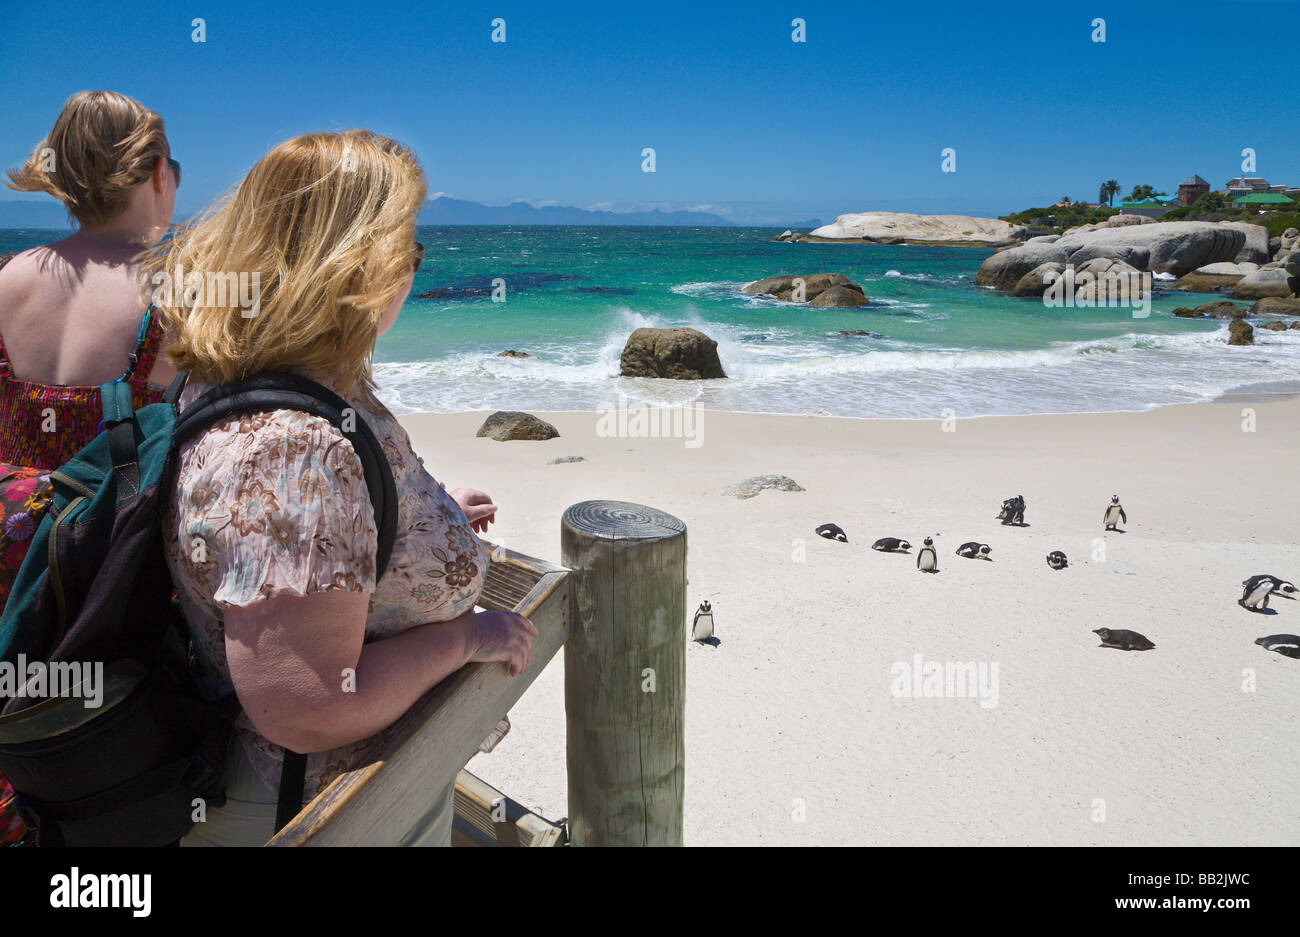 Penguins at 'Boulders Beach', 'Simons Town', 'South Africa' Stock Photo